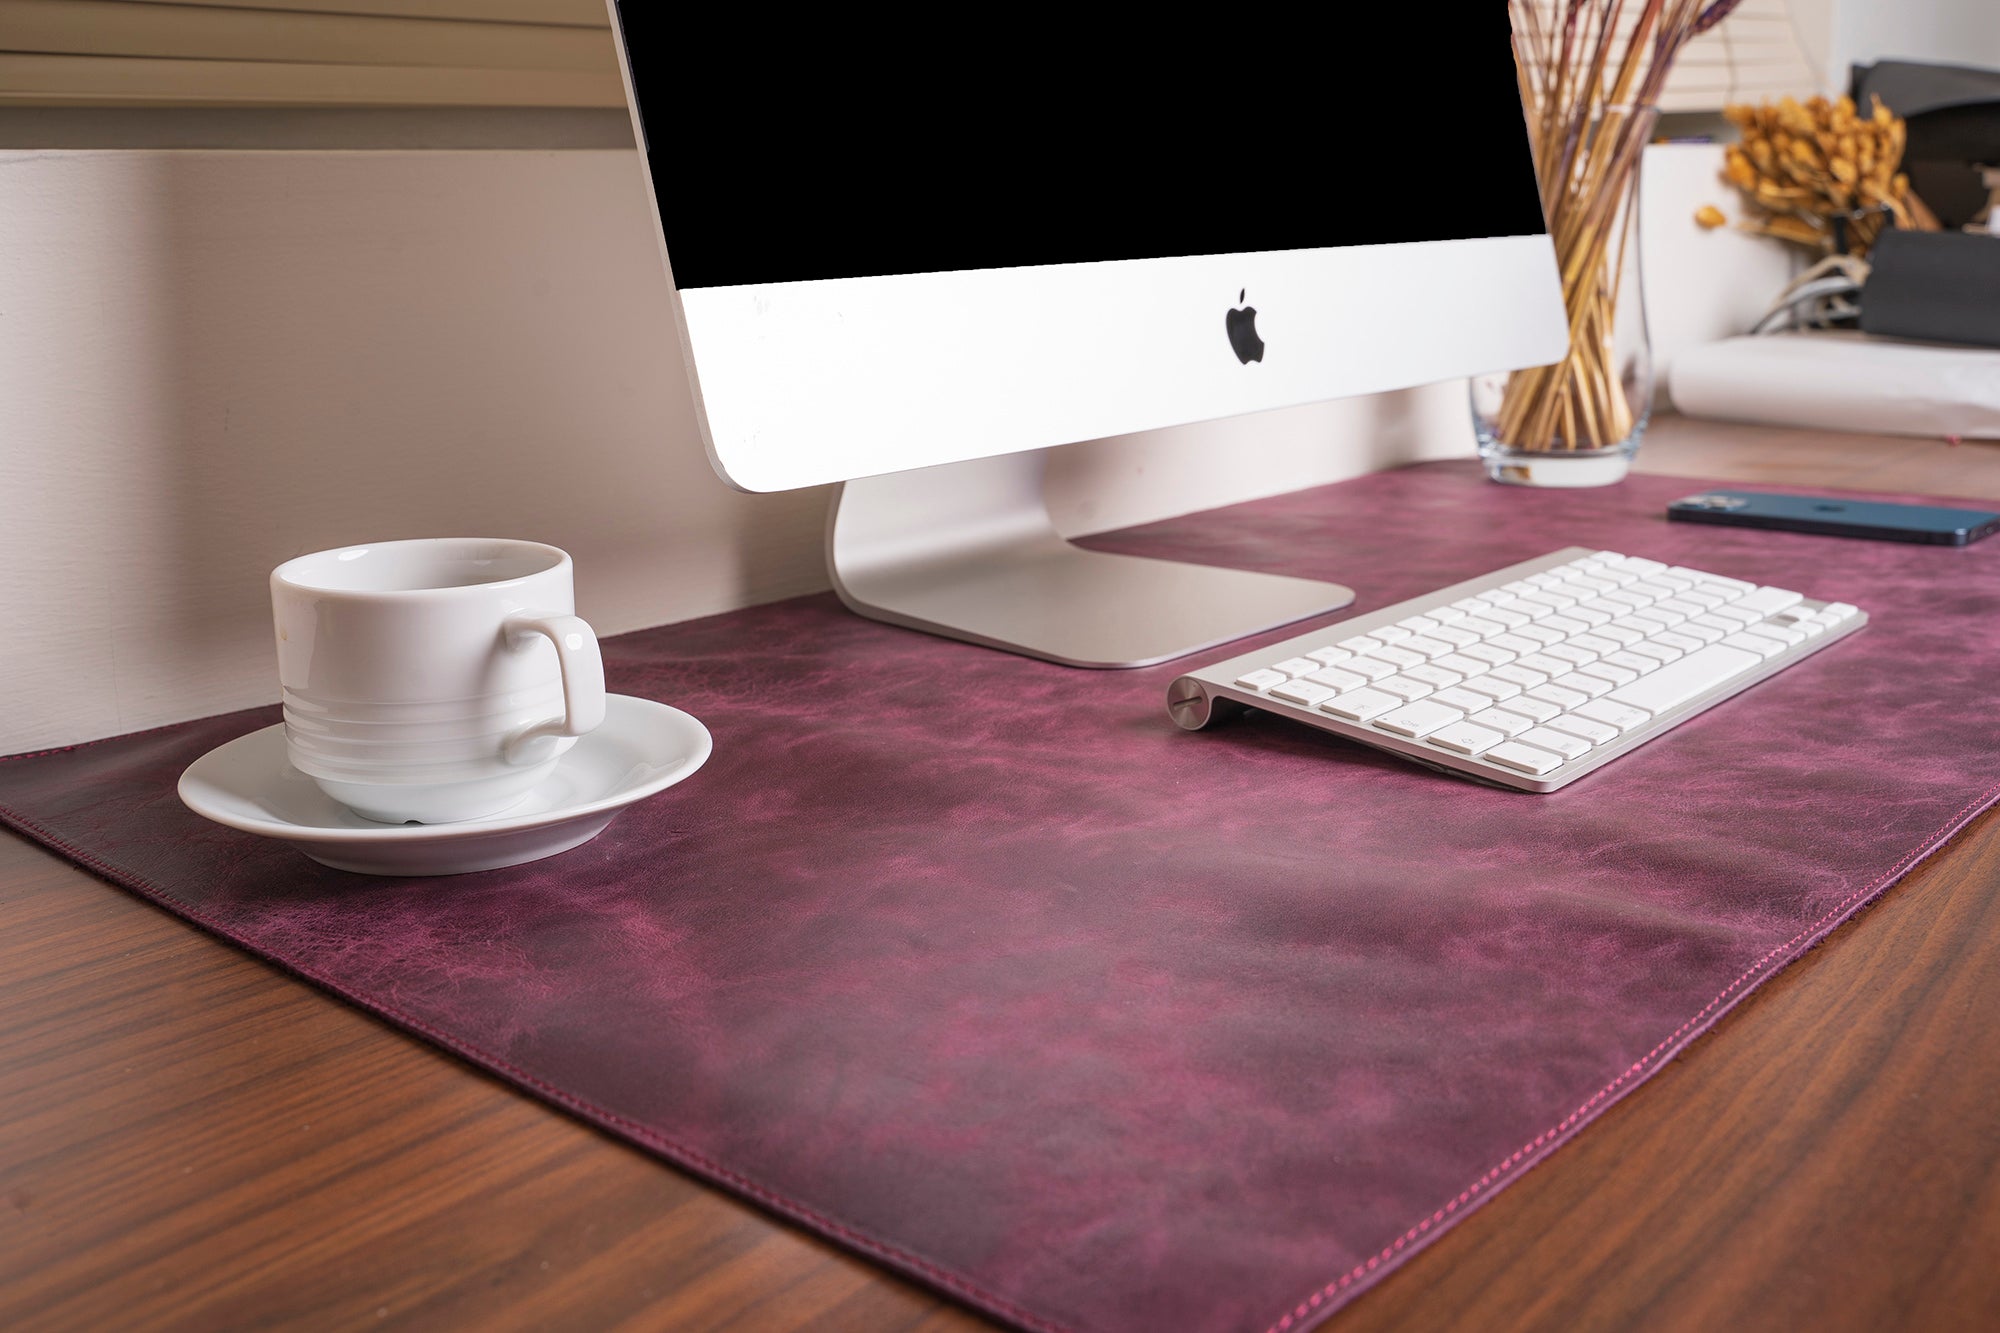 LupinnyLeather Genuine Cherry Leather Deskmat, Computer Pad, Office Desk Pad